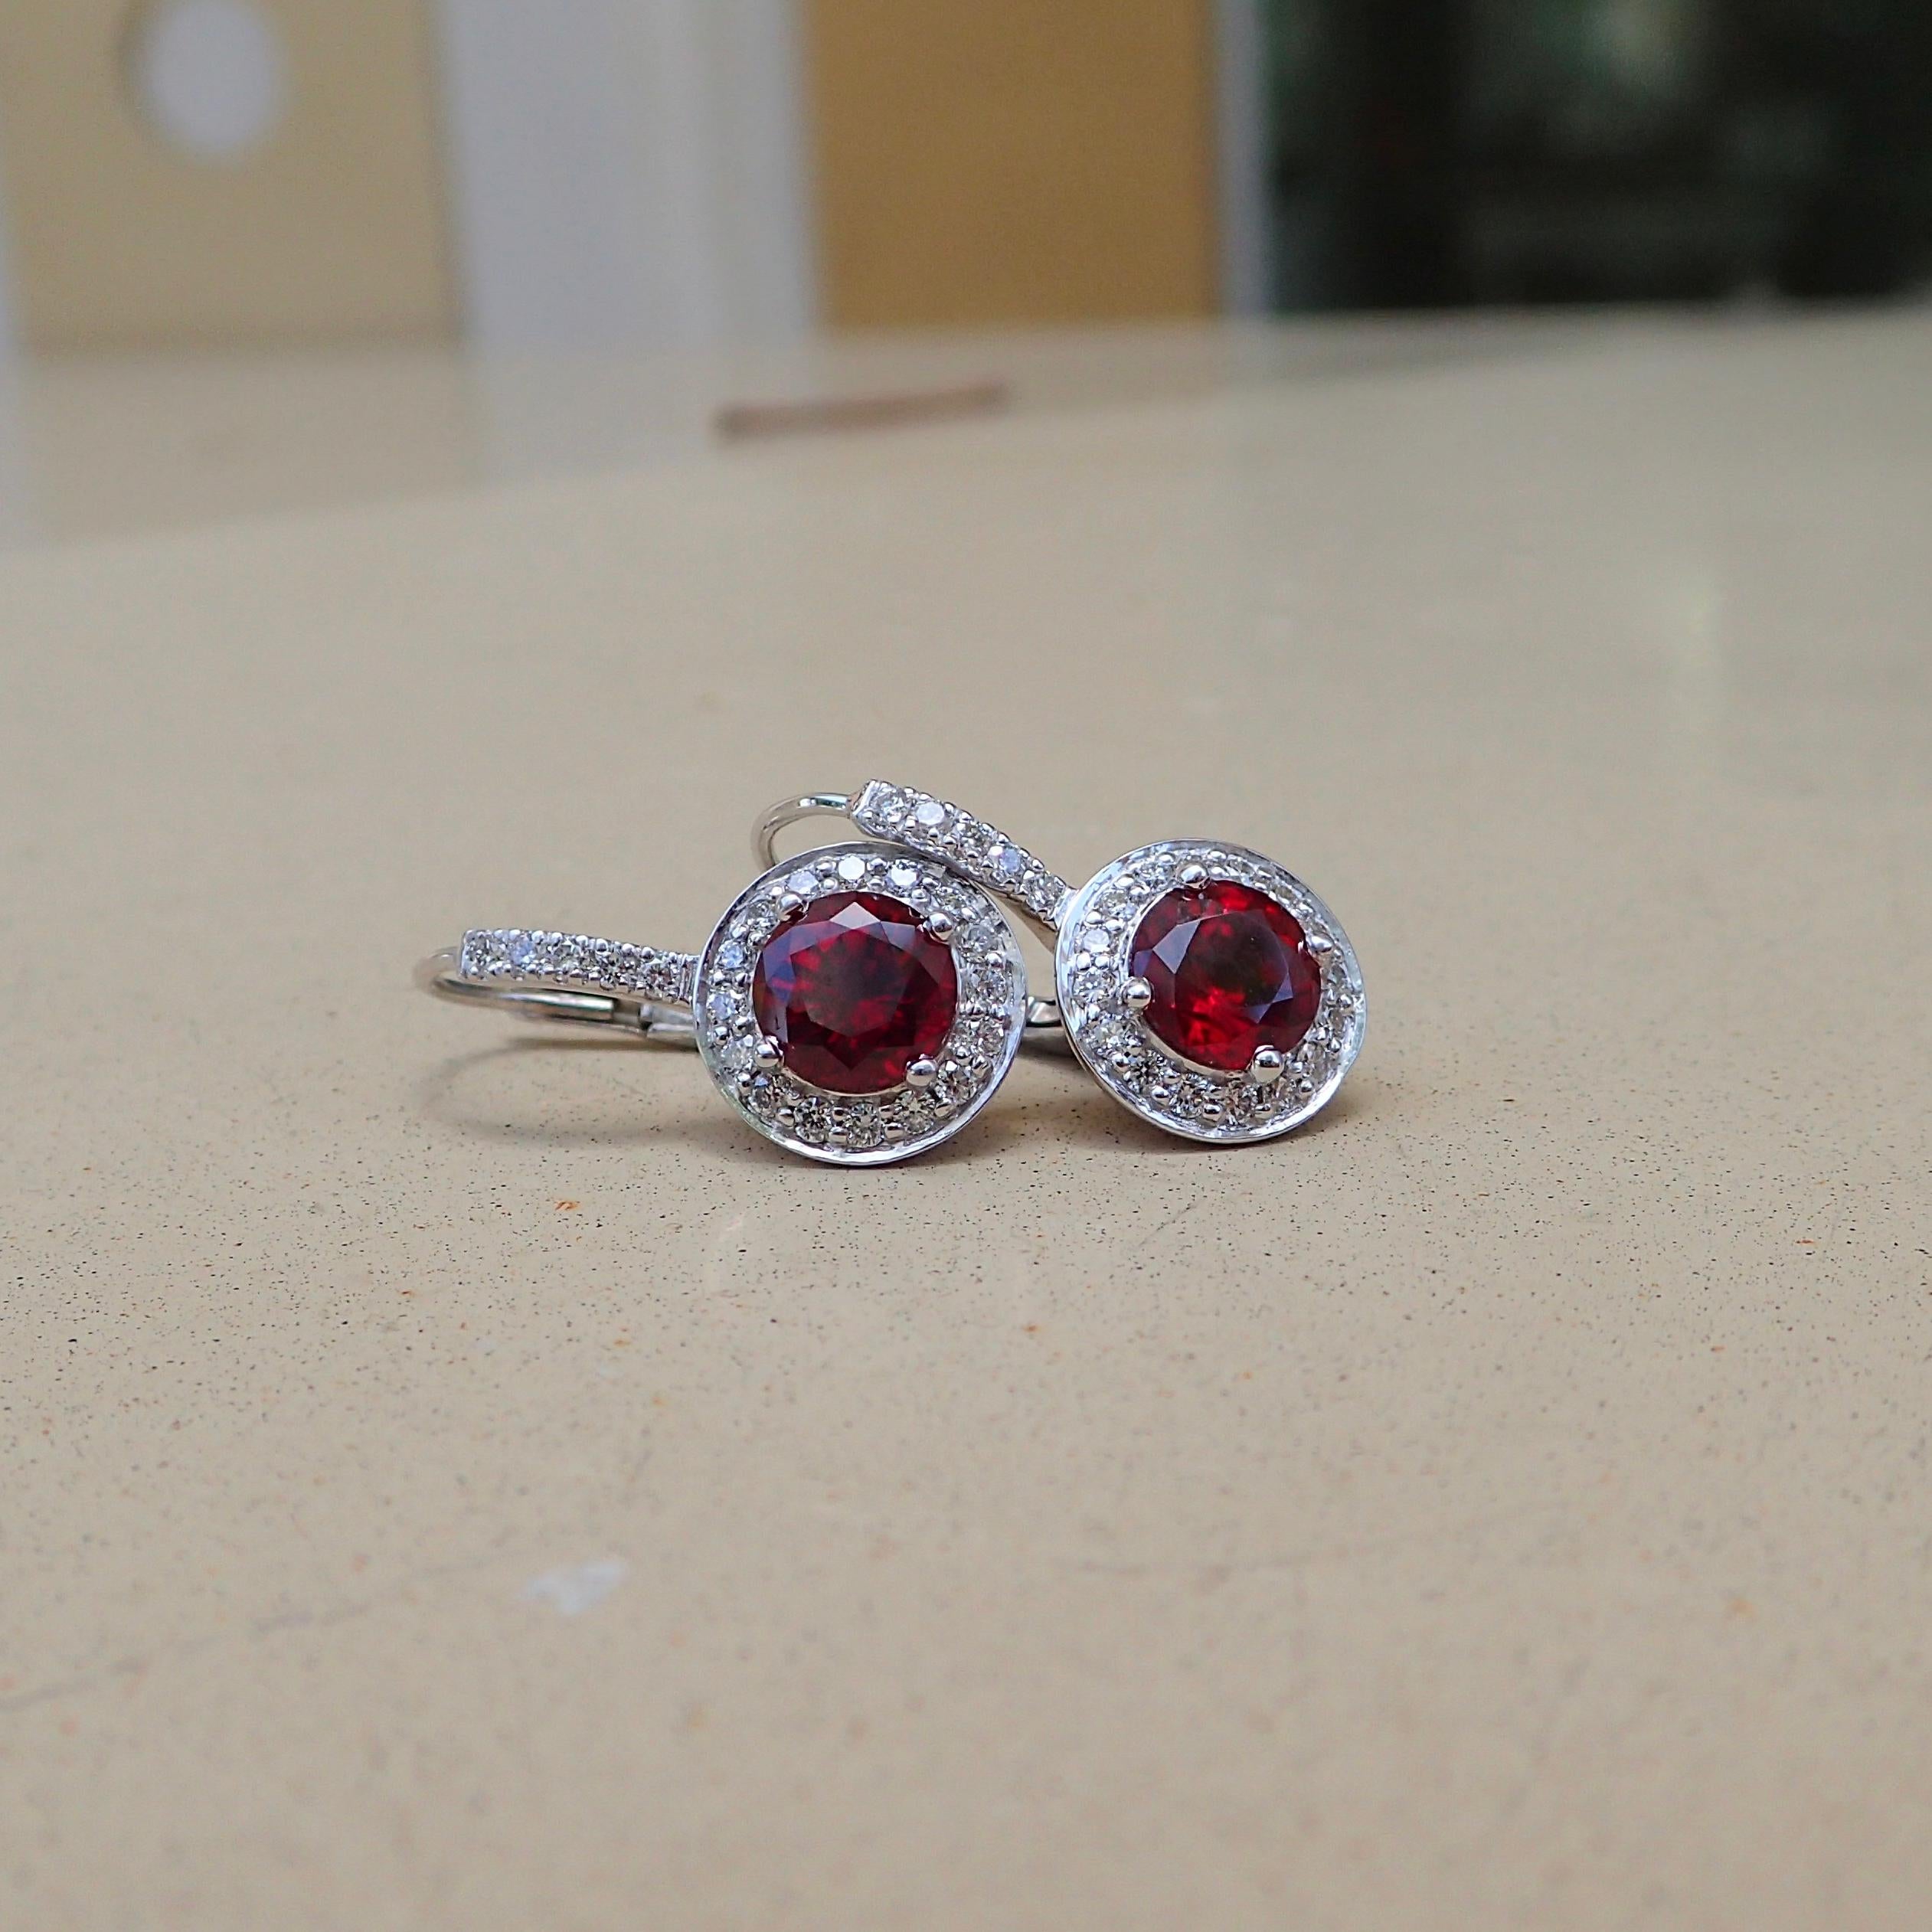 Contemporary 18k White Gold Earrings, 2.43 Carat Chatham-Created Ruby, 0.41 Carat Diamond